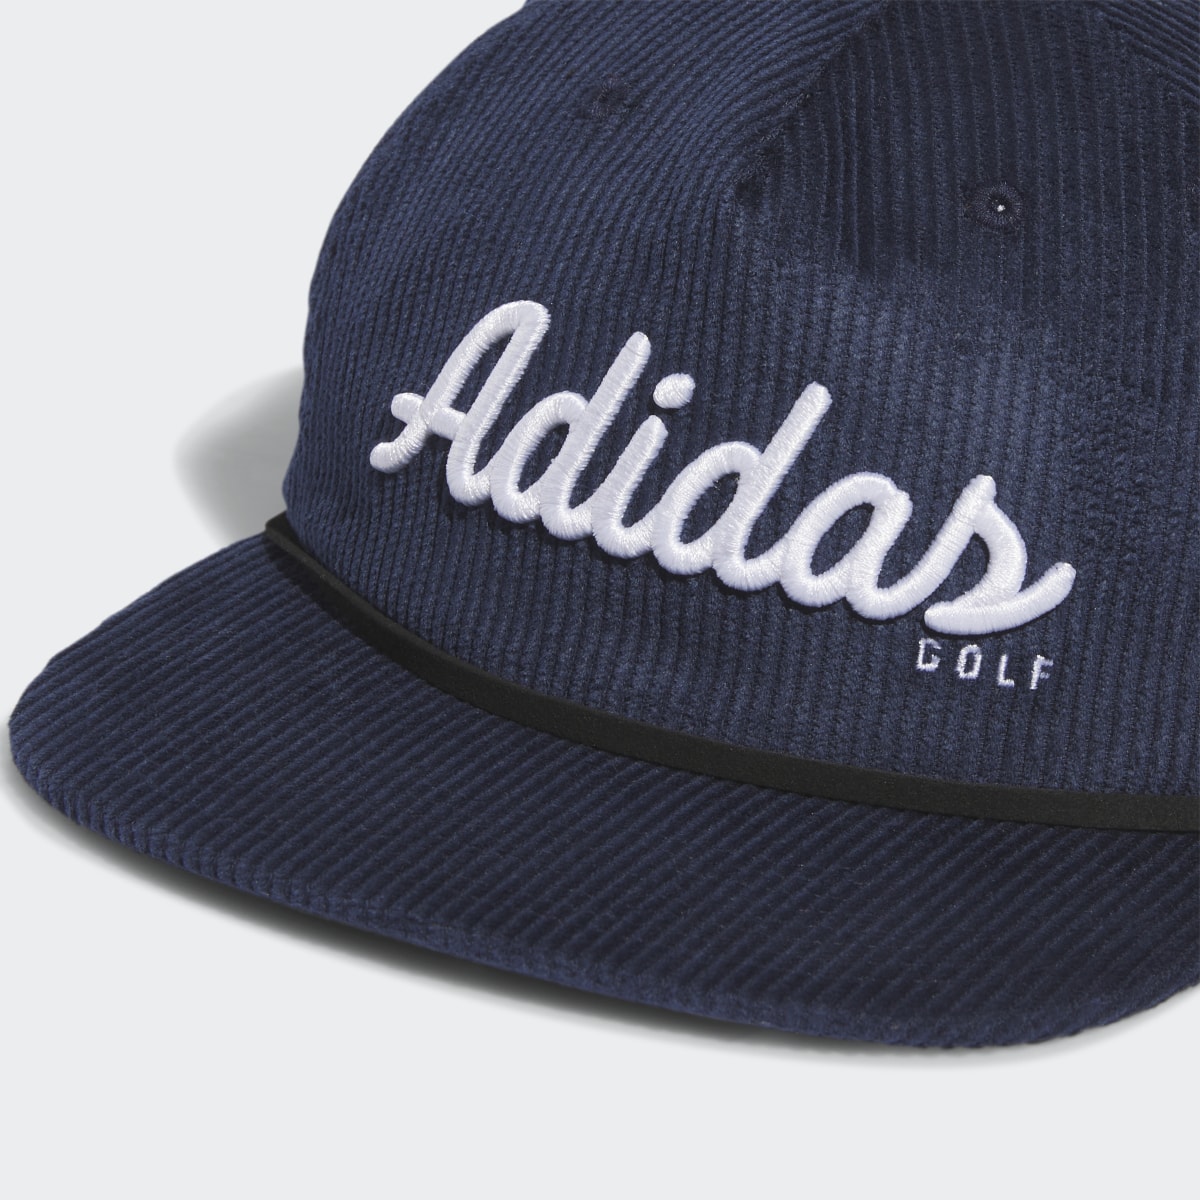 Adidas Corduroy Leather Five-Panel Rope Golf Hat. 4